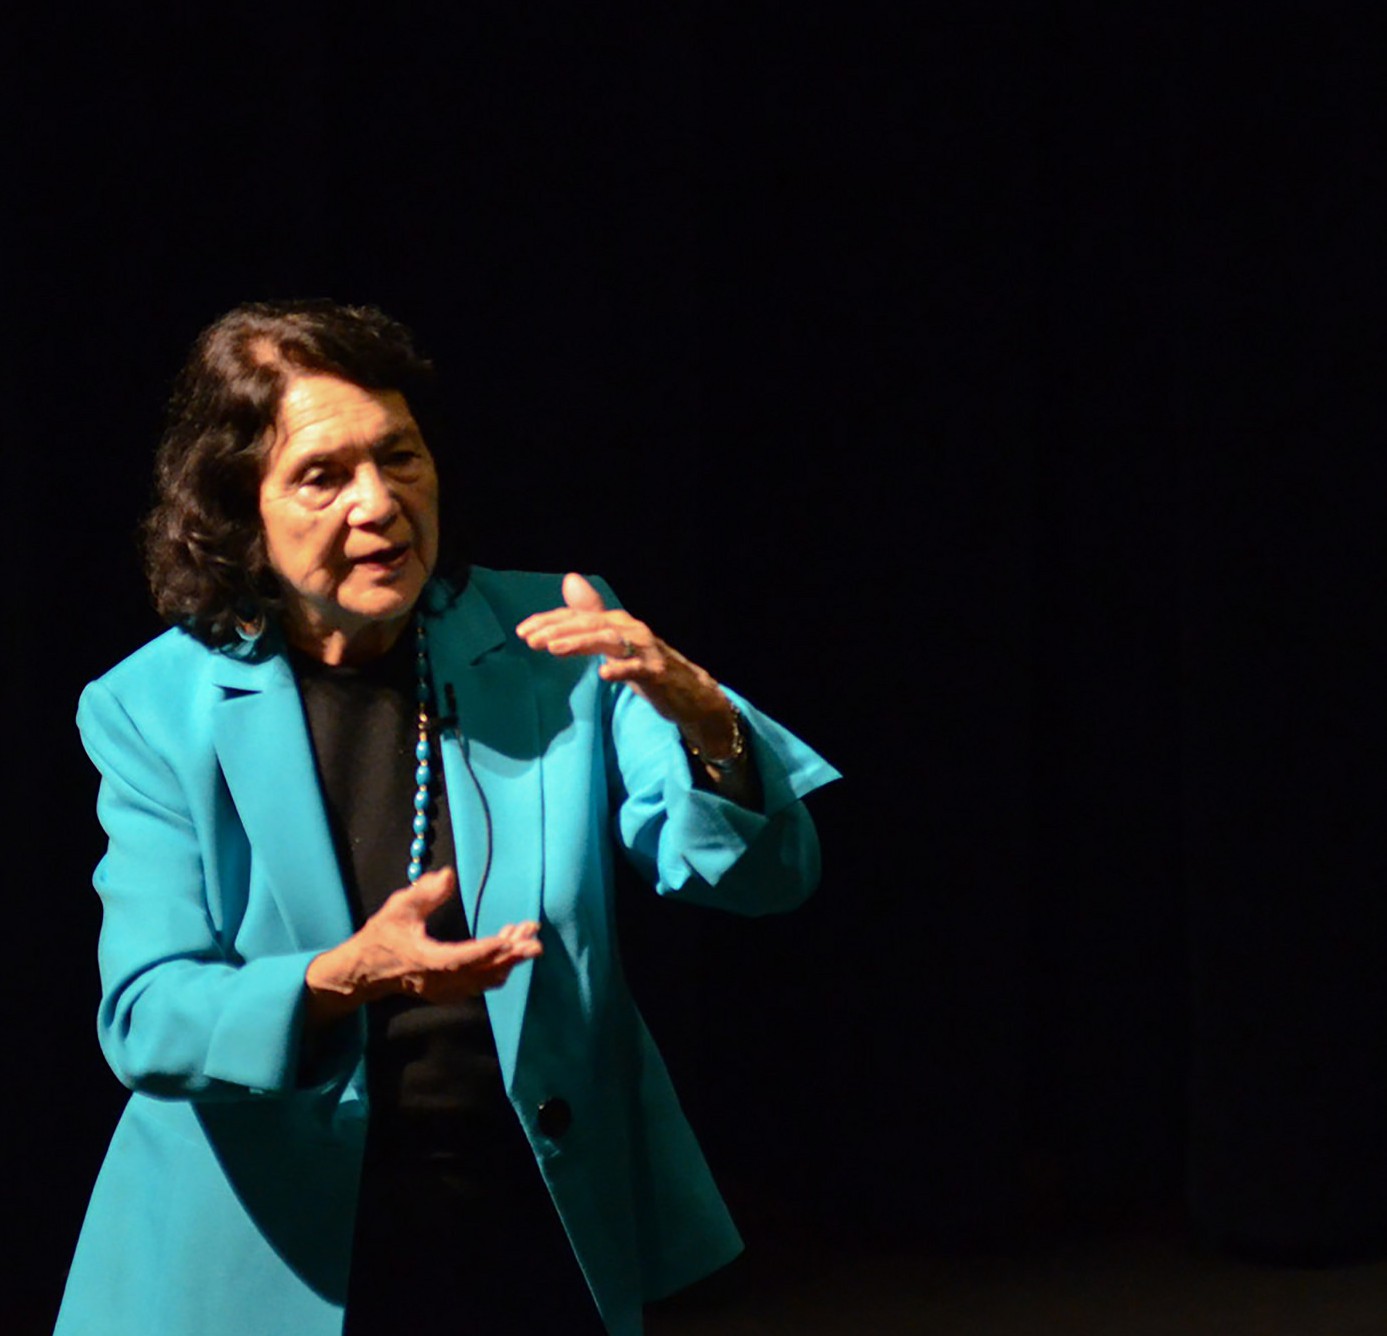 Labor leader and activist Dolores Huerta speaks to her audience about "correcting economic injustice" through her talk, Achieving Equity through Education that was held on campus in the Howard Brubeck Theatre on March 8, 2016. (Tracy Grassel/The Telescope)